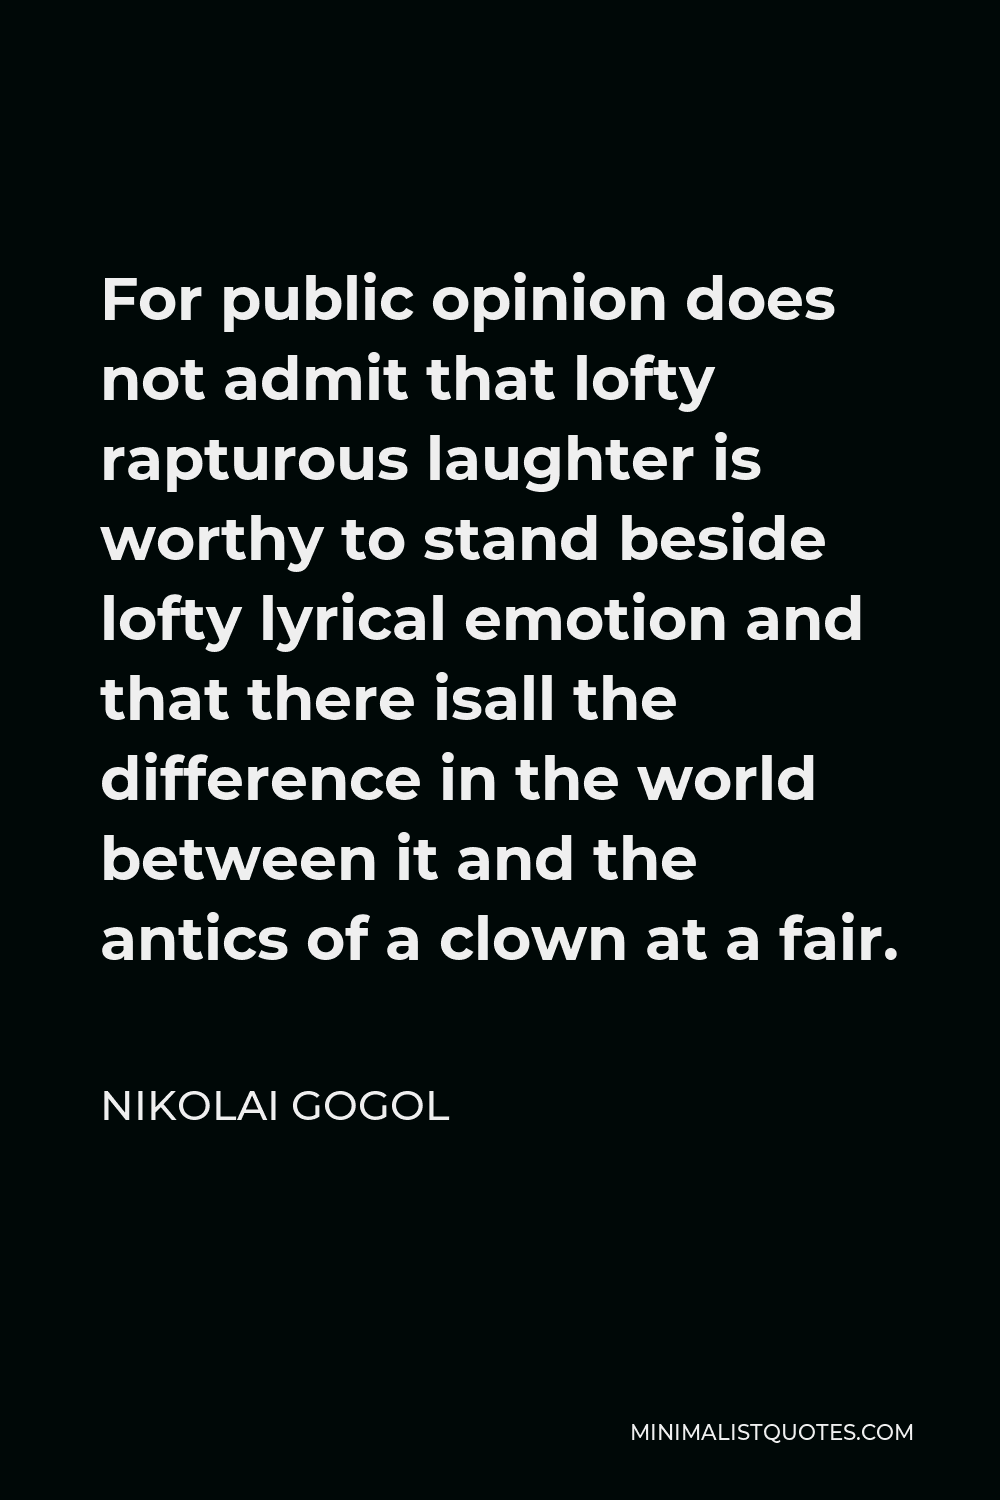 Nikolai Gogol Quote - For public opinion does not admit that lofty rapturous laughter is worthy to stand beside lofty lyrical emotion and that there isall the difference in the world between it and the antics of a clown at a fair.